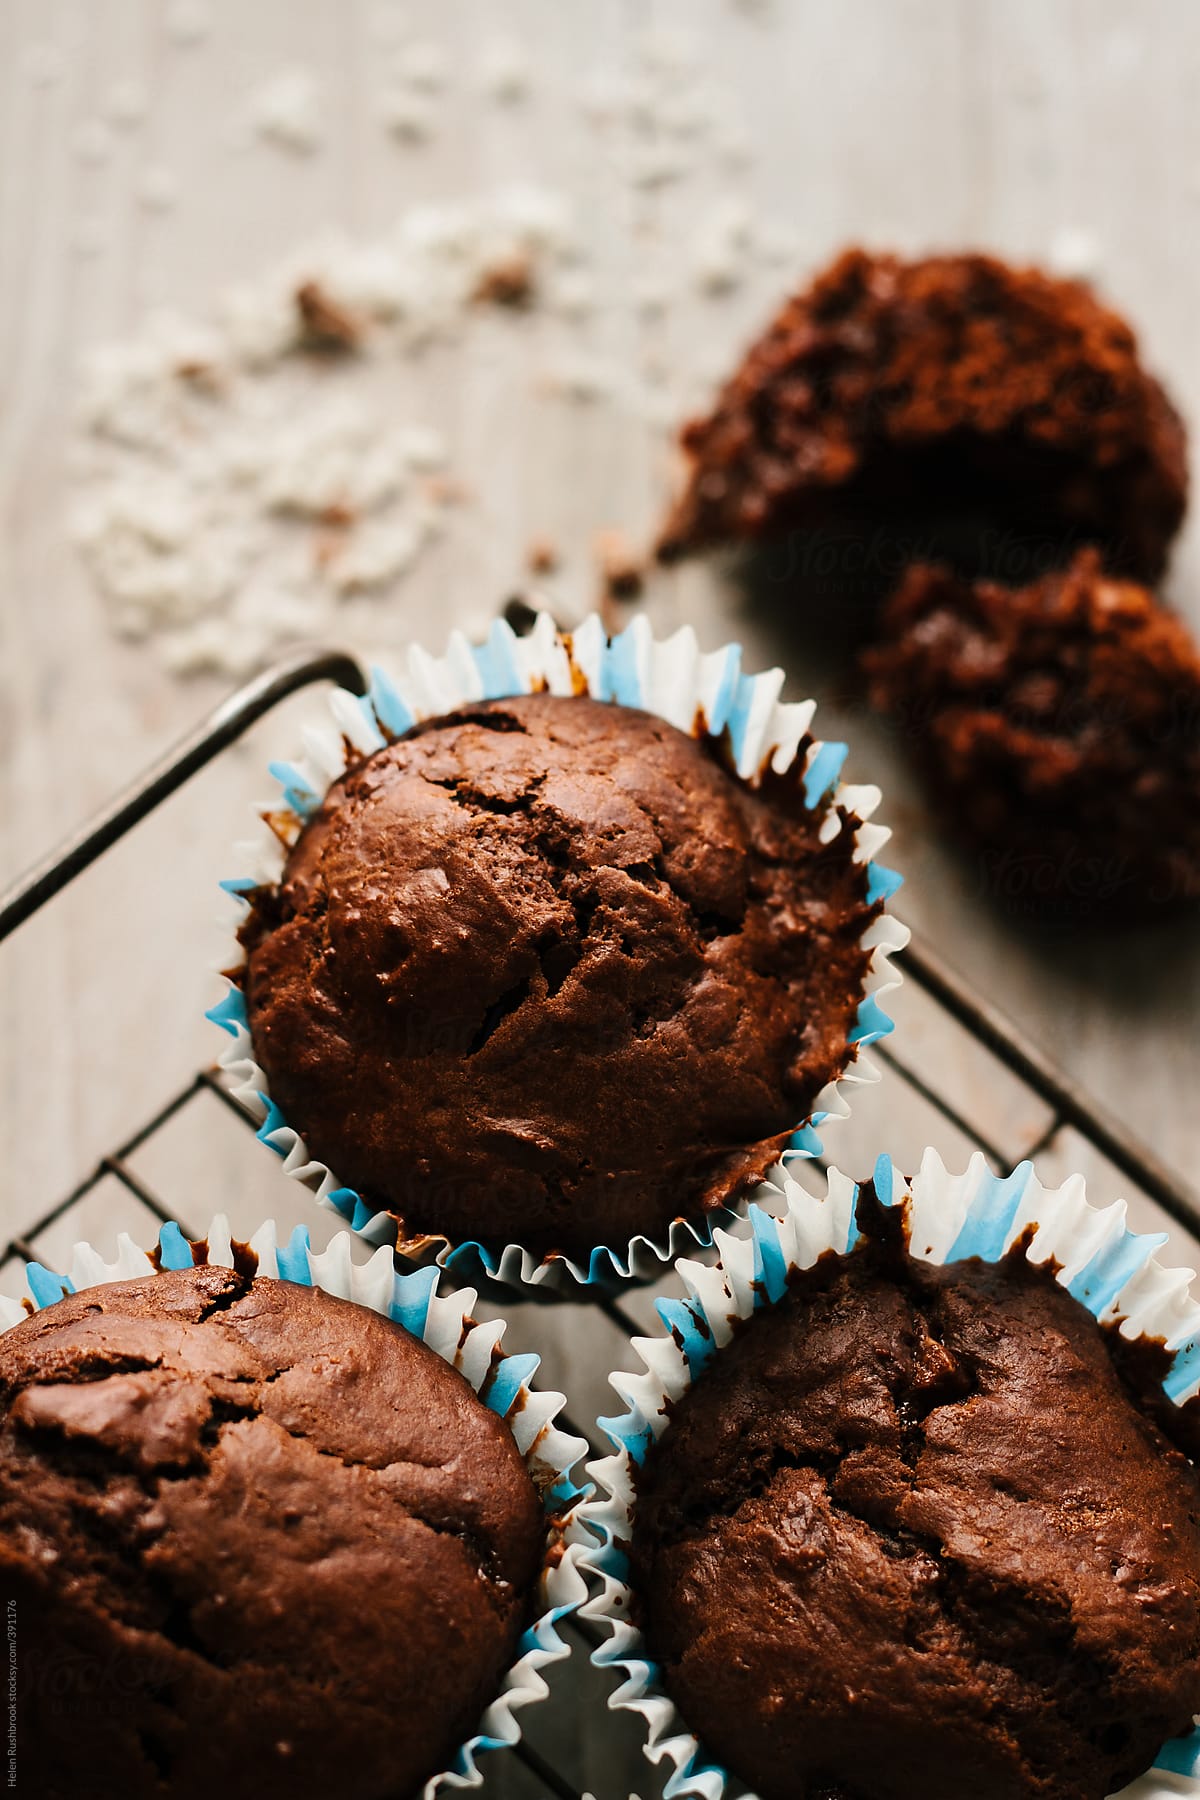 Double chocolate and salted caramel muffins.